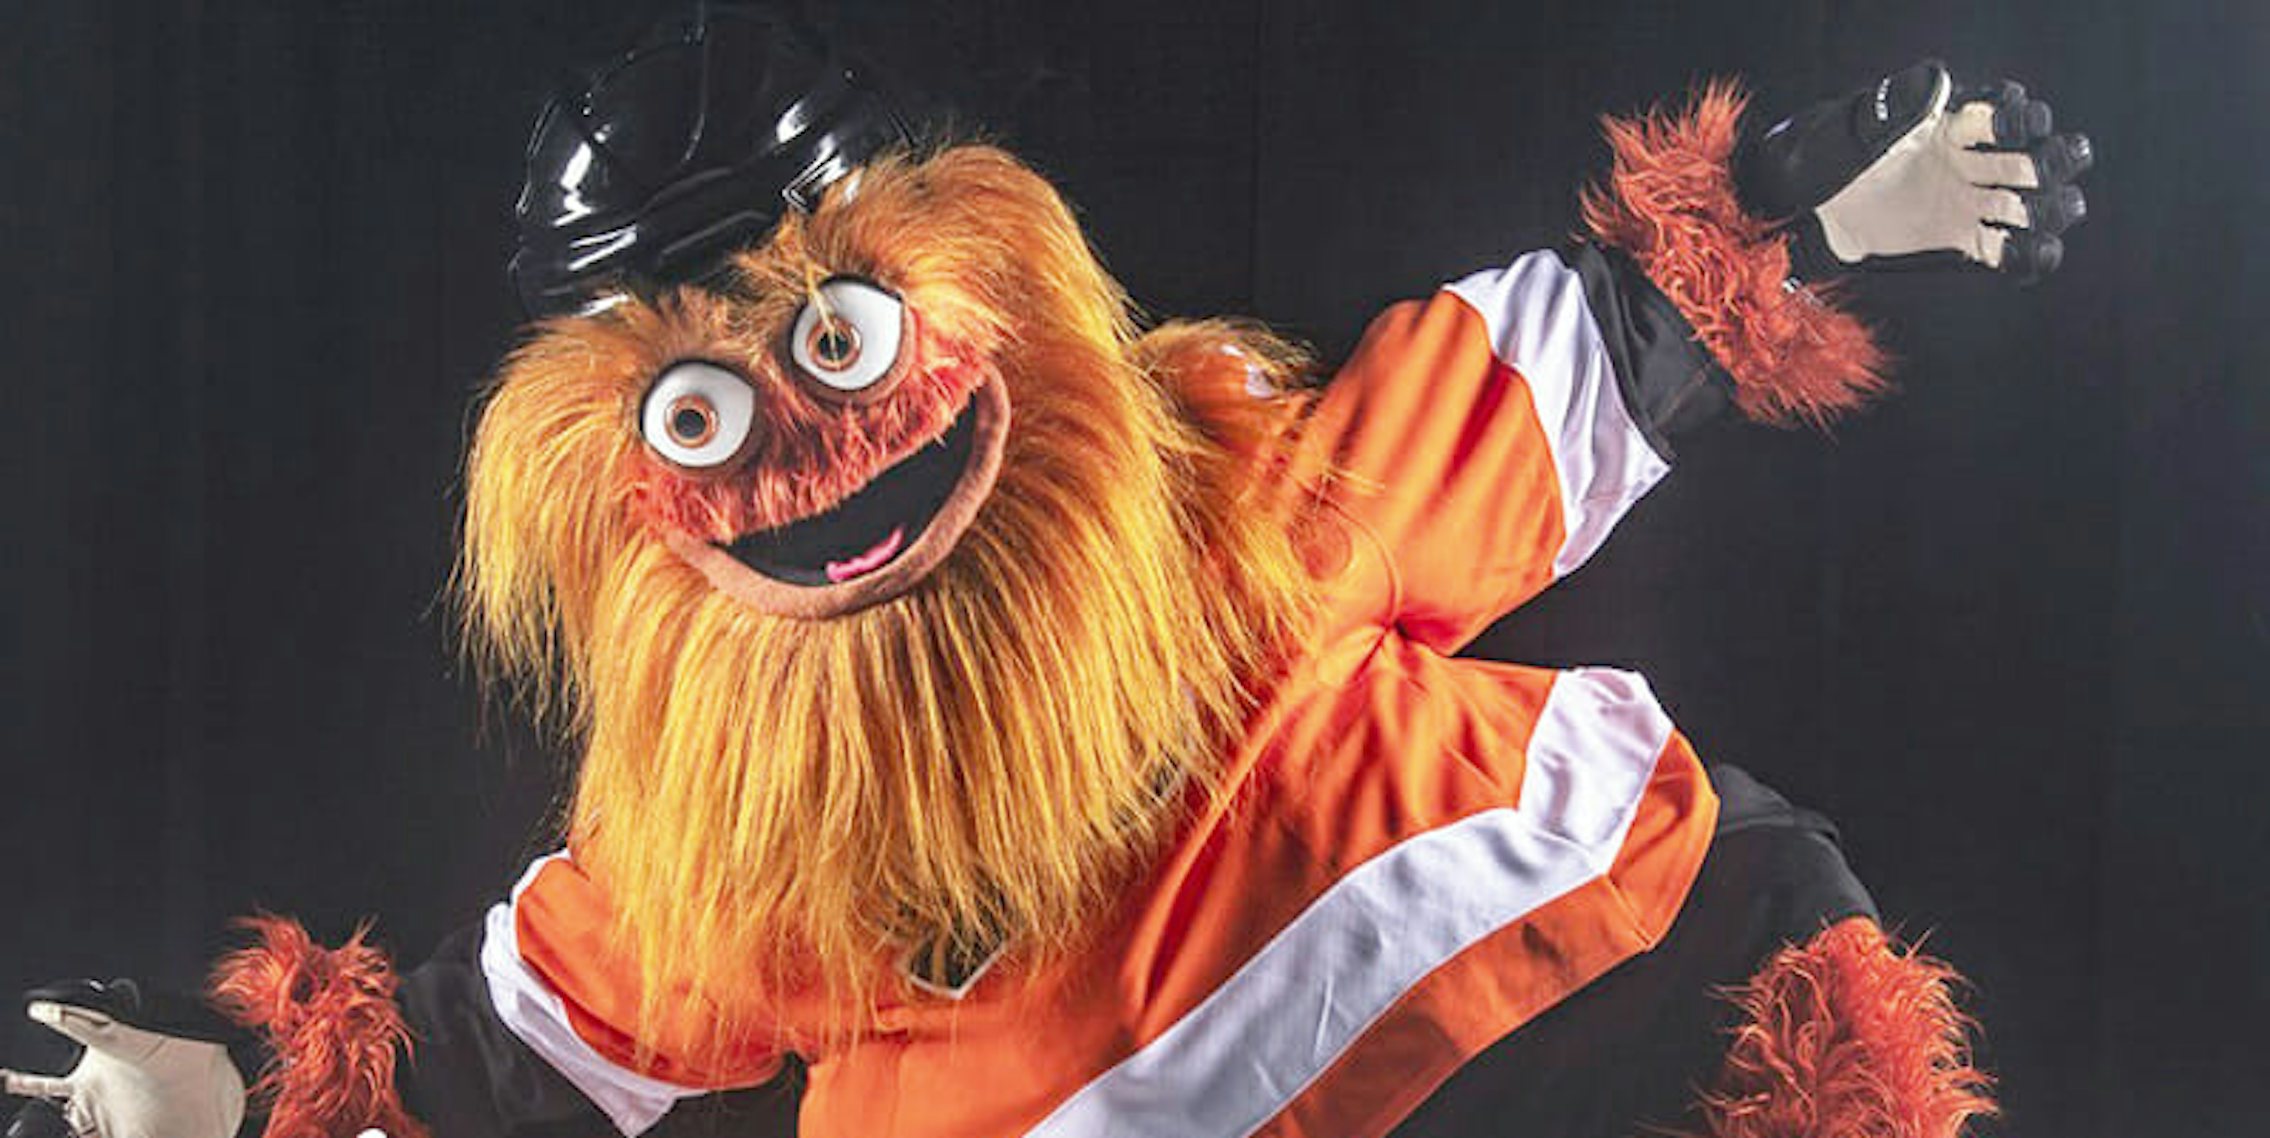 Philadelphia Flyers Mascot Gritty Becomes Wonder Woman in this